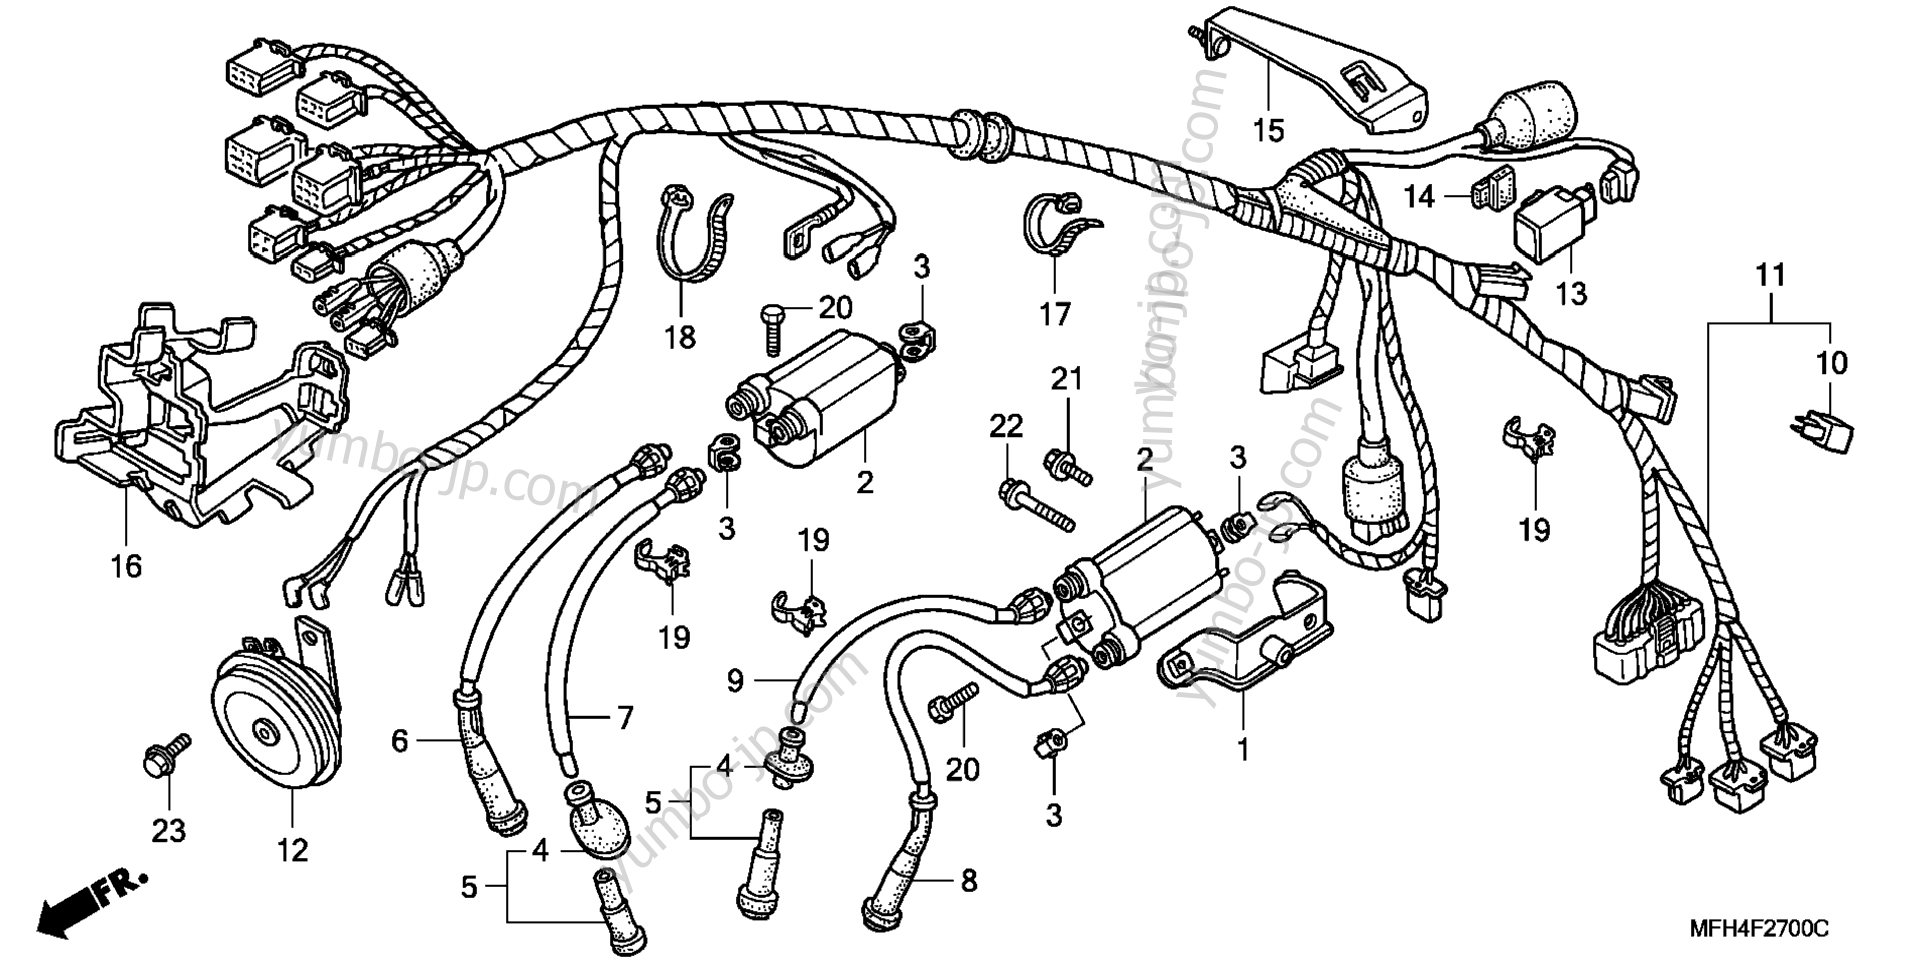 WIRE HARNESS for motorcycles HONDA VT600C A 2006 year